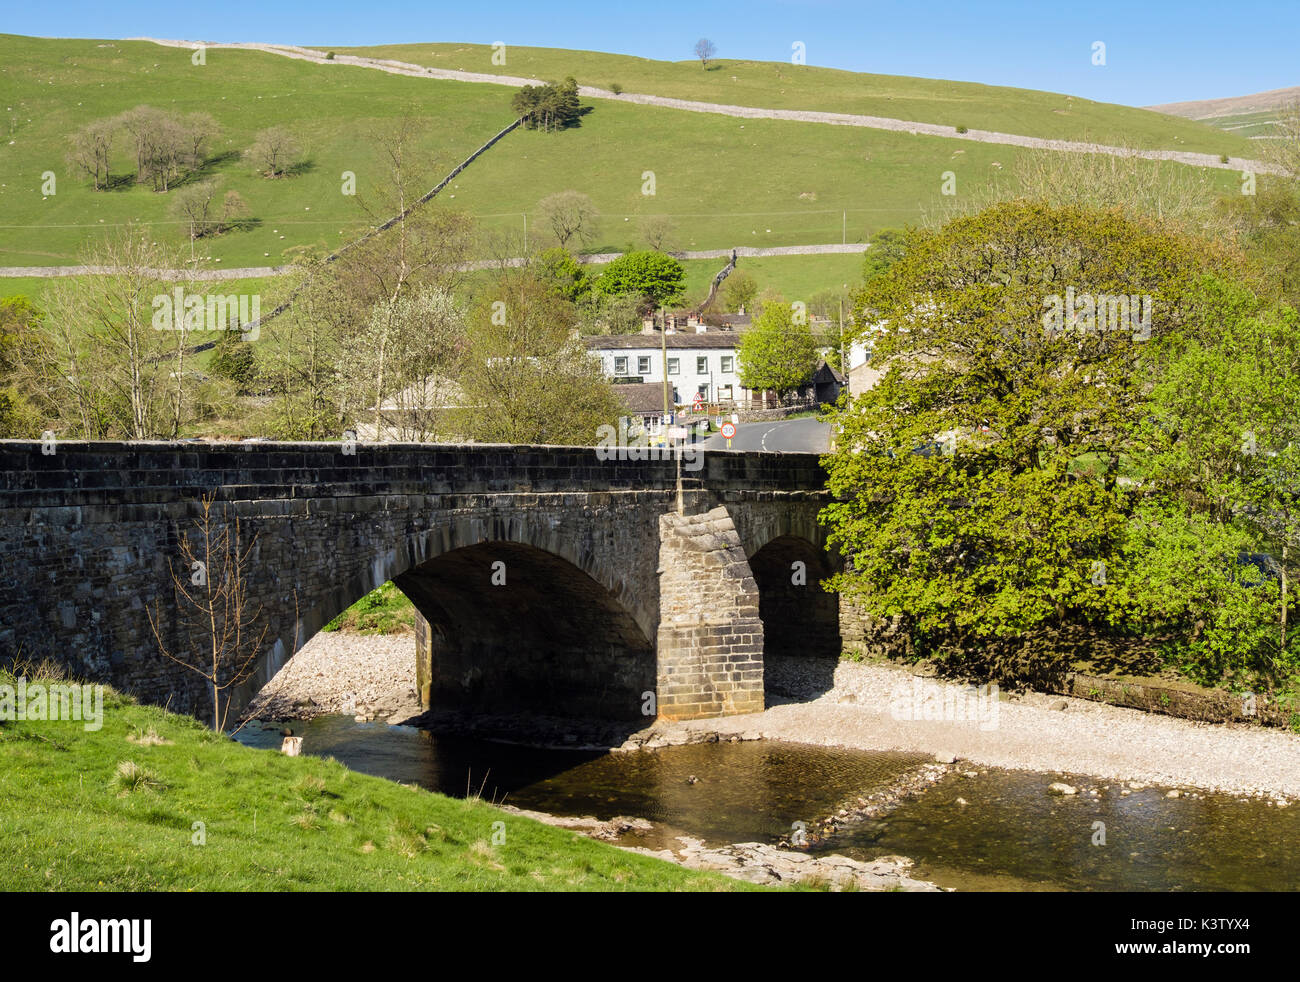 Bridge over River Wharfe in Kettlewell, Upper Wharfedale, Yorkshire Dales National Park, North Yorkshire, England, UK, Britain, Europe Stock Photo